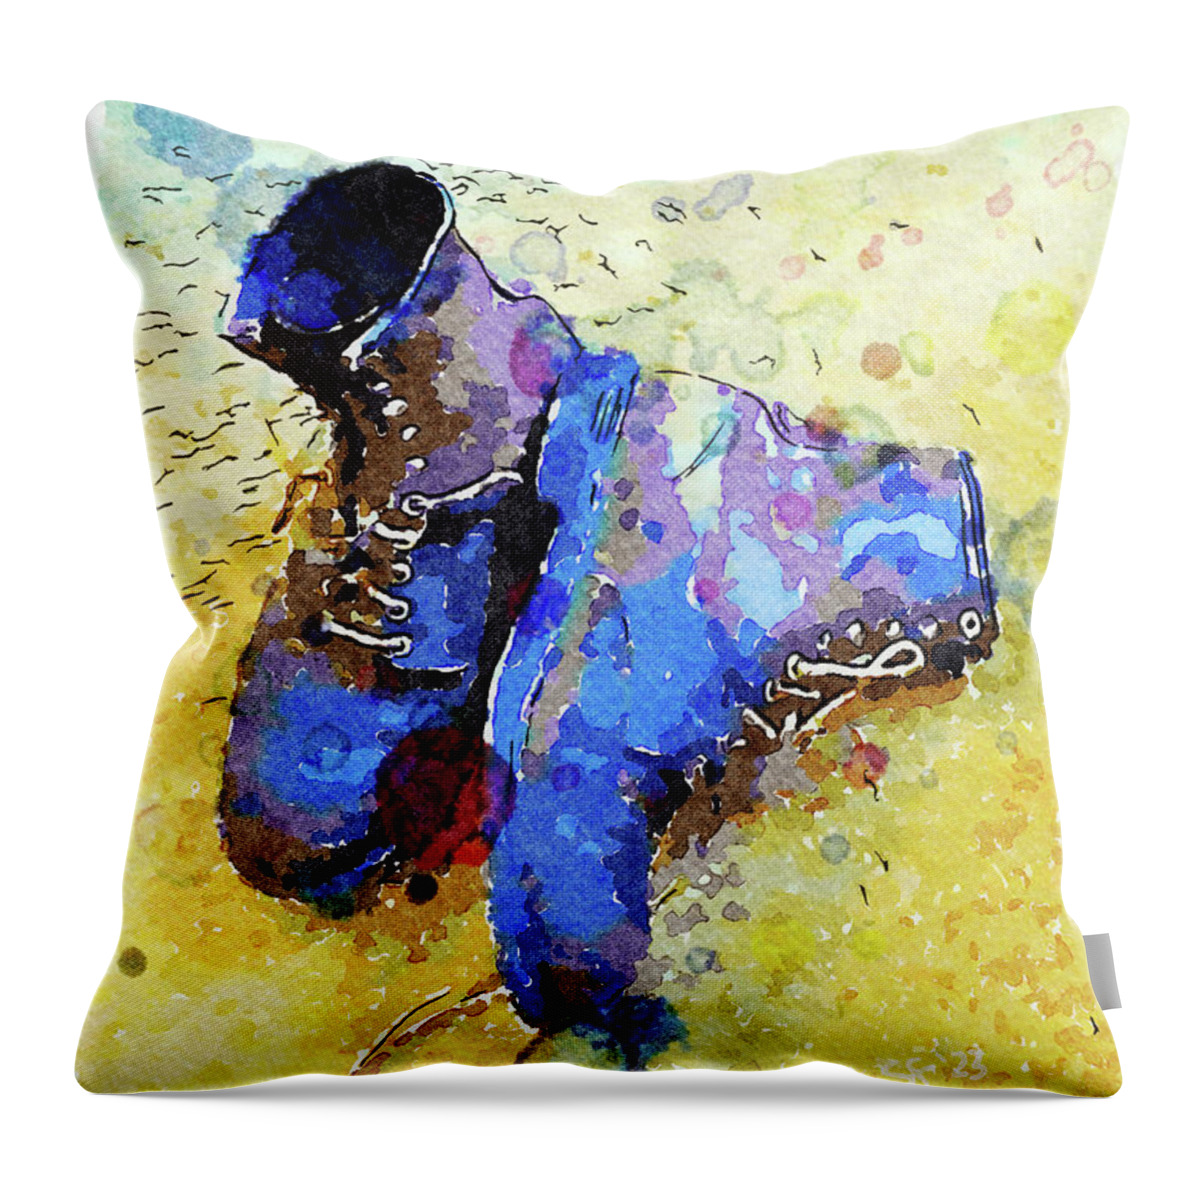 Boots Throw Pillow featuring the mixed media Old Work Boots Watercolor Painting by Shelli Fitzpatrick